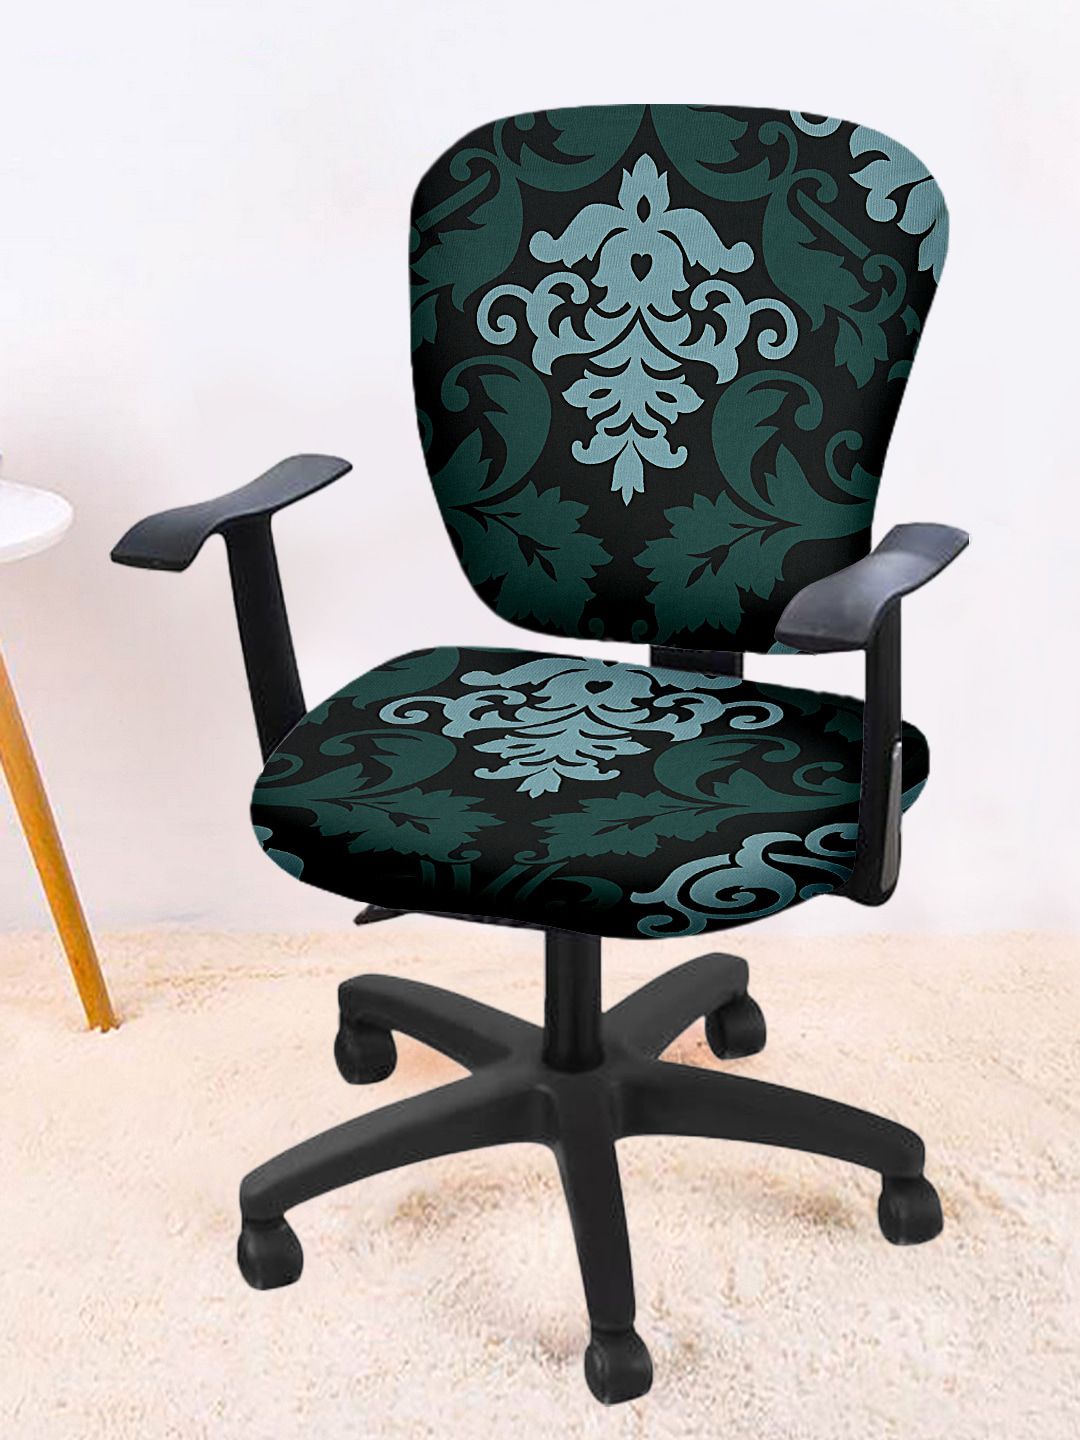 Cortina Set Of 6 Navy Blue & Green Ethnic Motifs Print Chair Covers Price in India